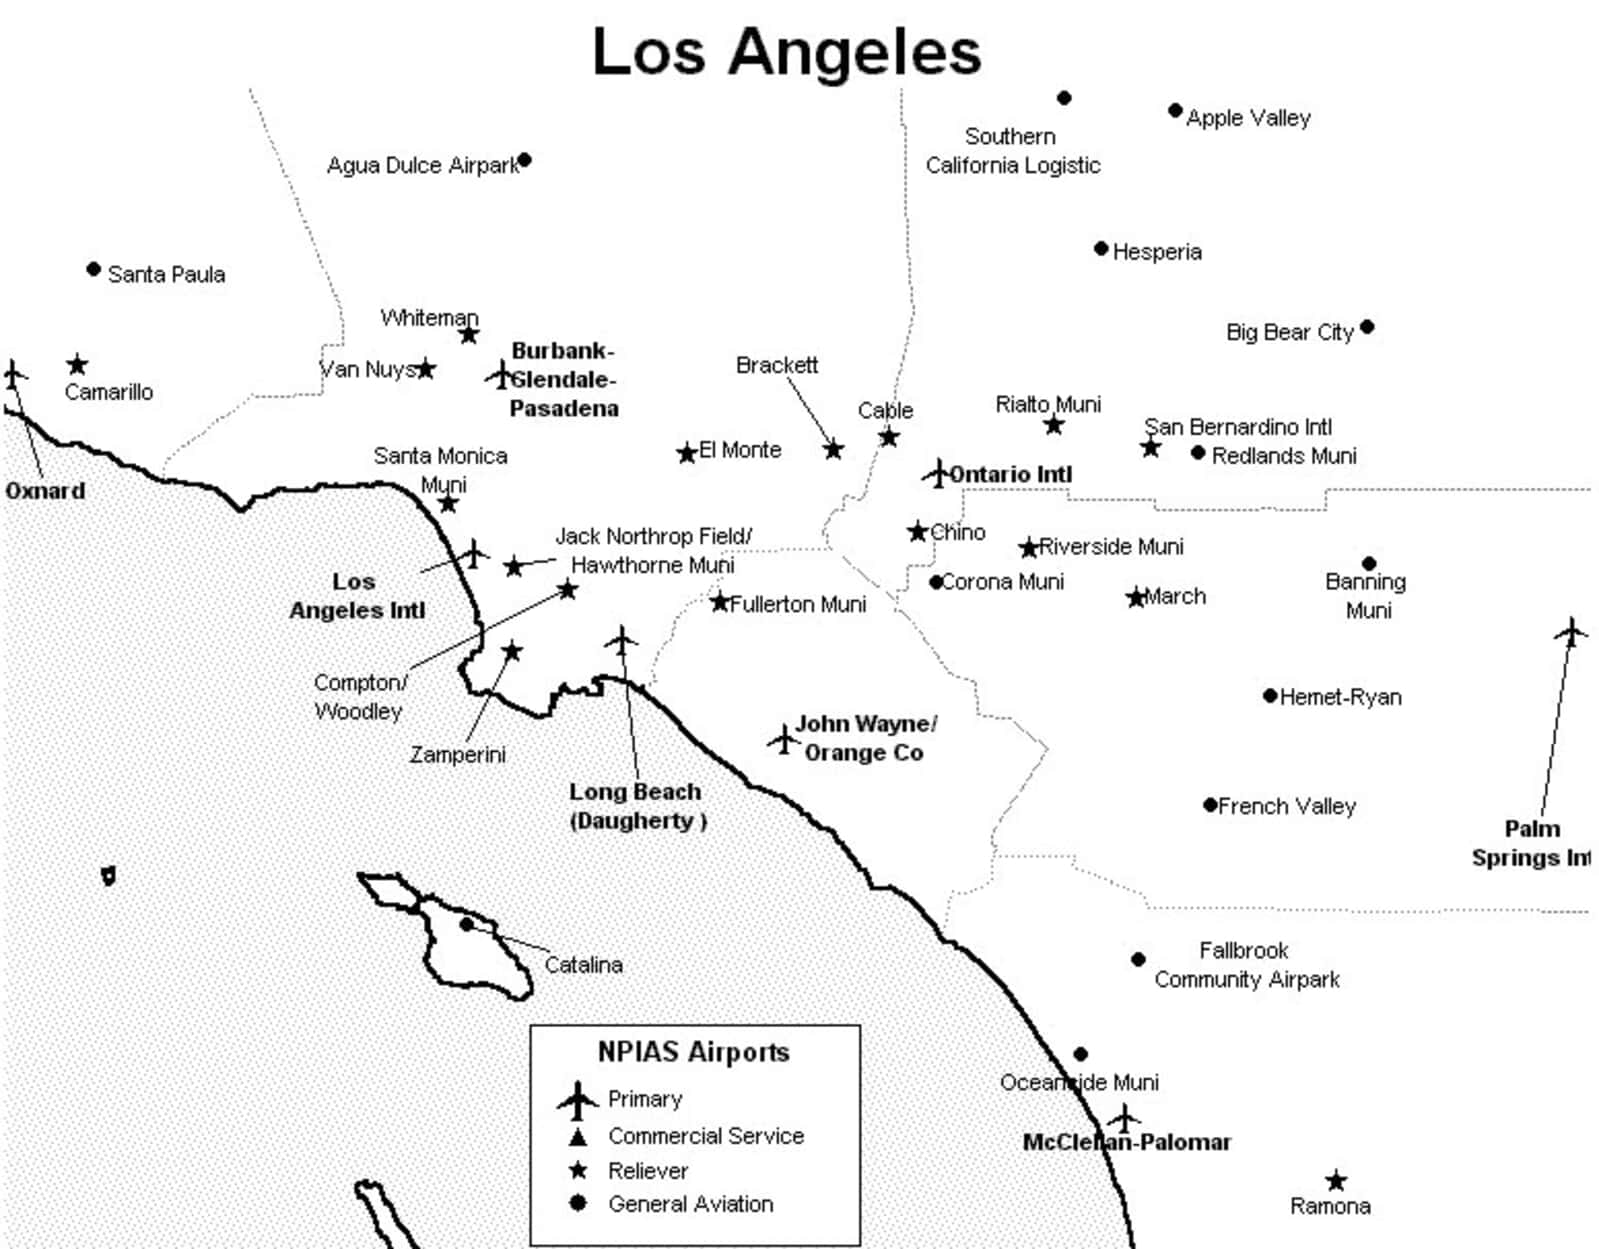 airports in los angeles map Los Angeles Area Airports Map Los Angeles Airports airports in los angeles map